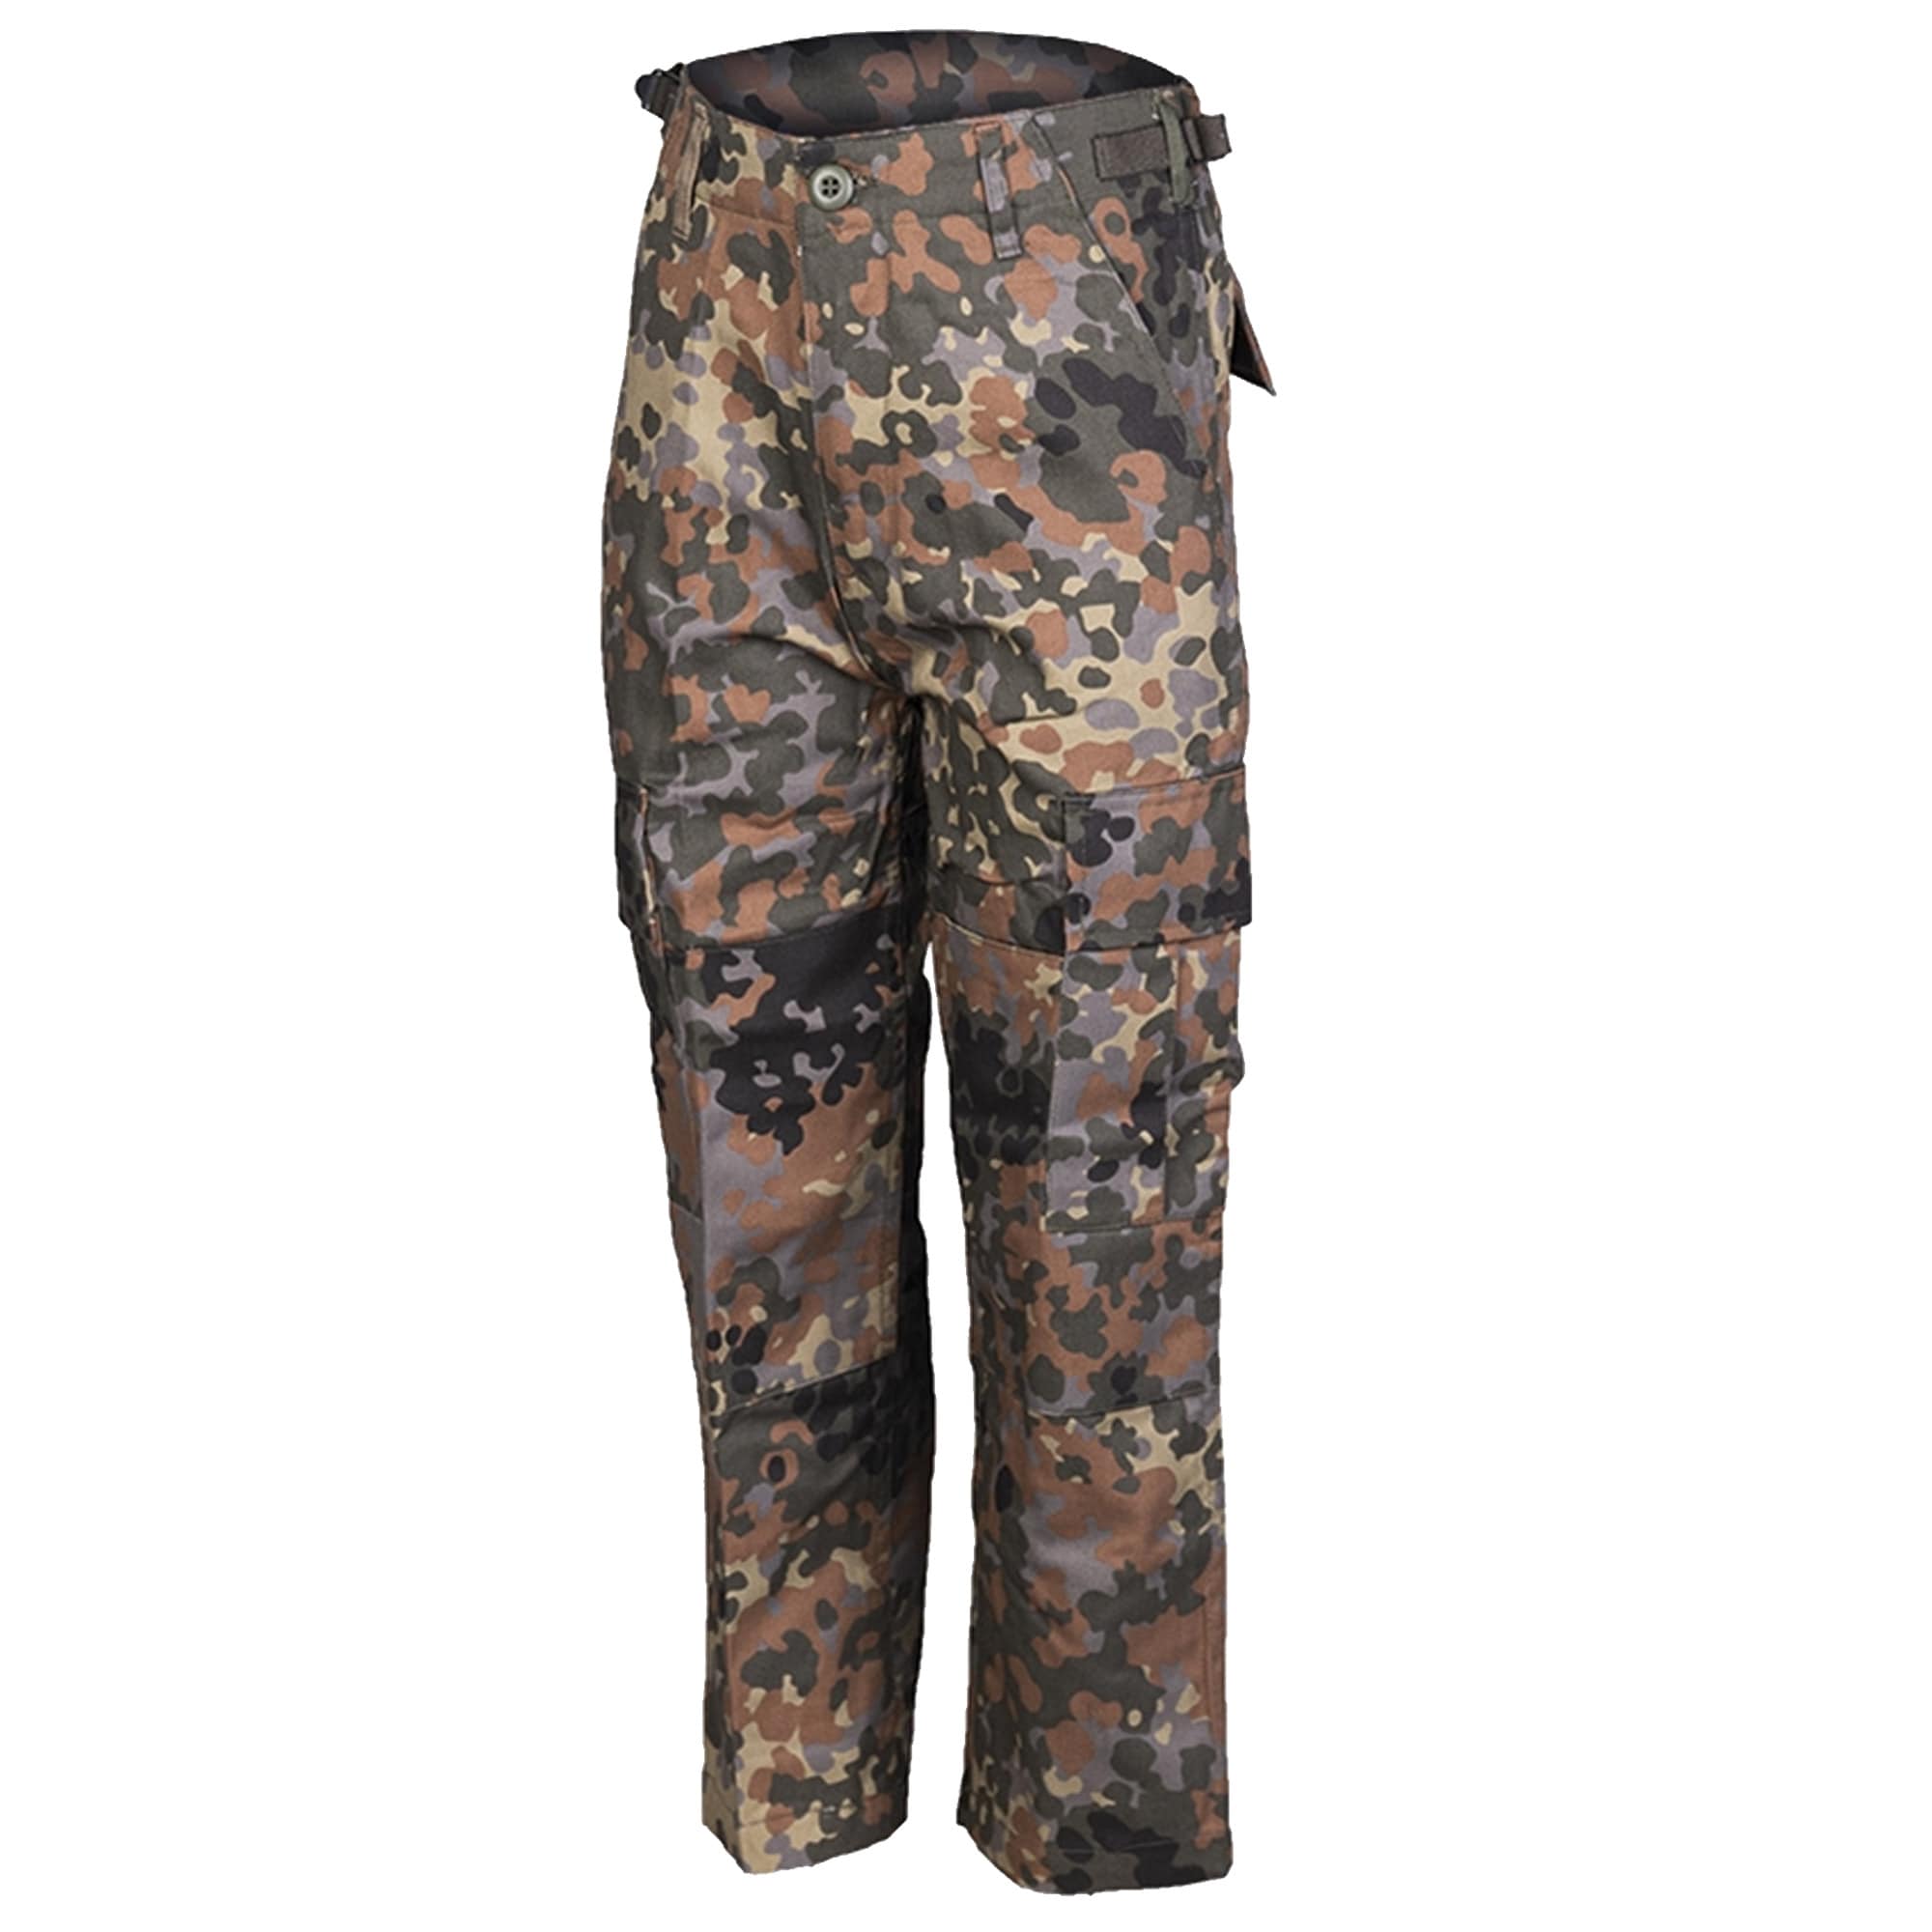 Camouflage Military Boys Cargo Pants For Teenage Boys Big Size 4 14 Years  210306 From Jiao08, $9.63 | DHgate.Com